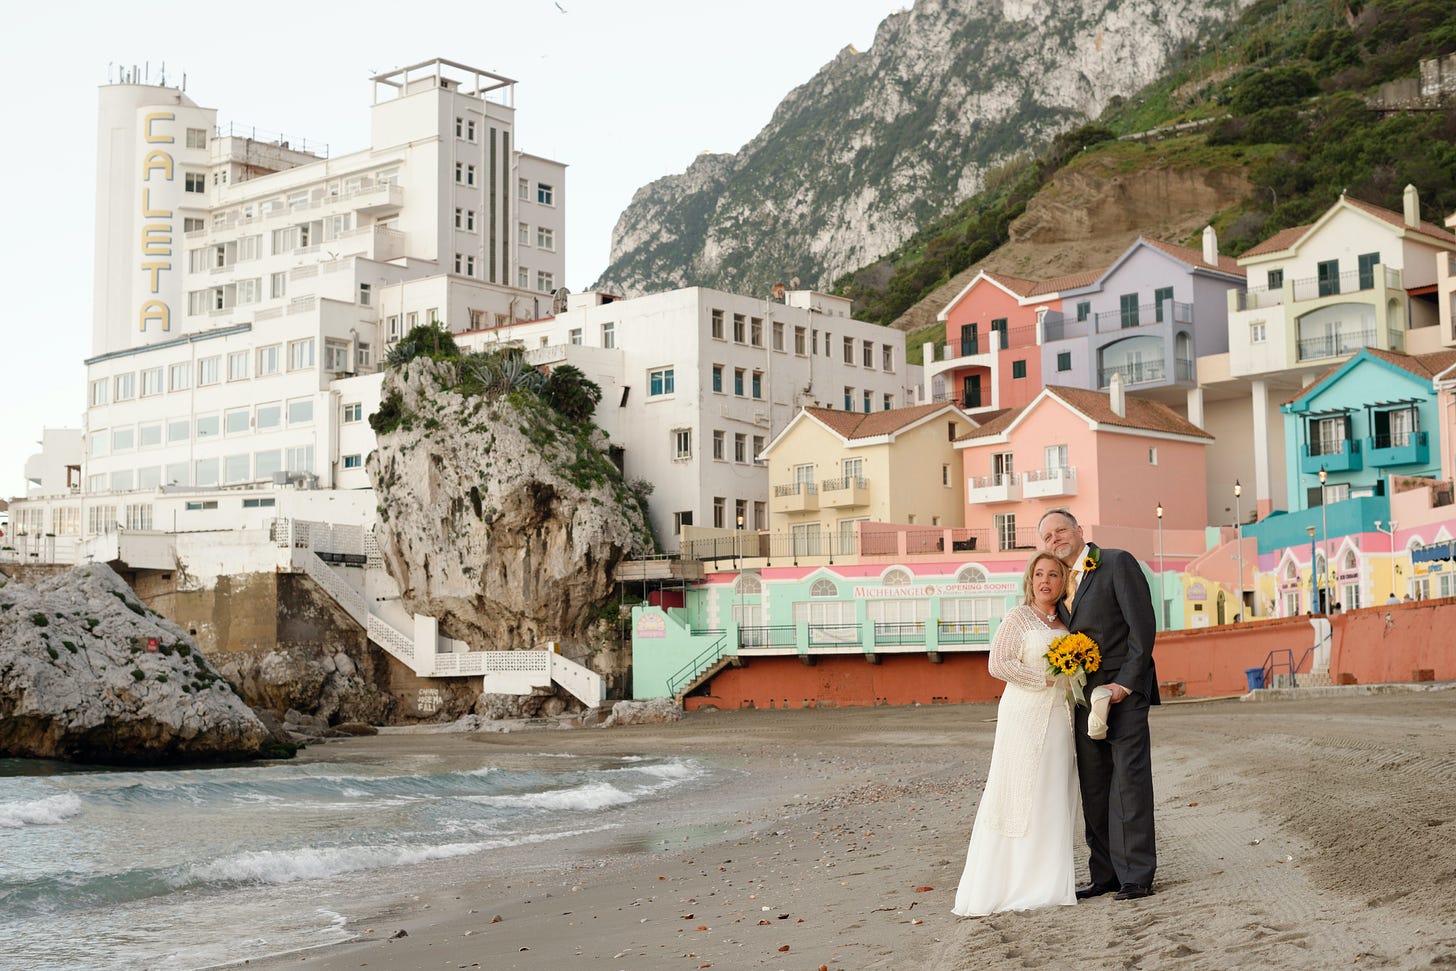 wide angle view of the beach and the Caleta Hotel in Gibraltar; my wife and I are standing in the front right foreground on our wedding day in 2013